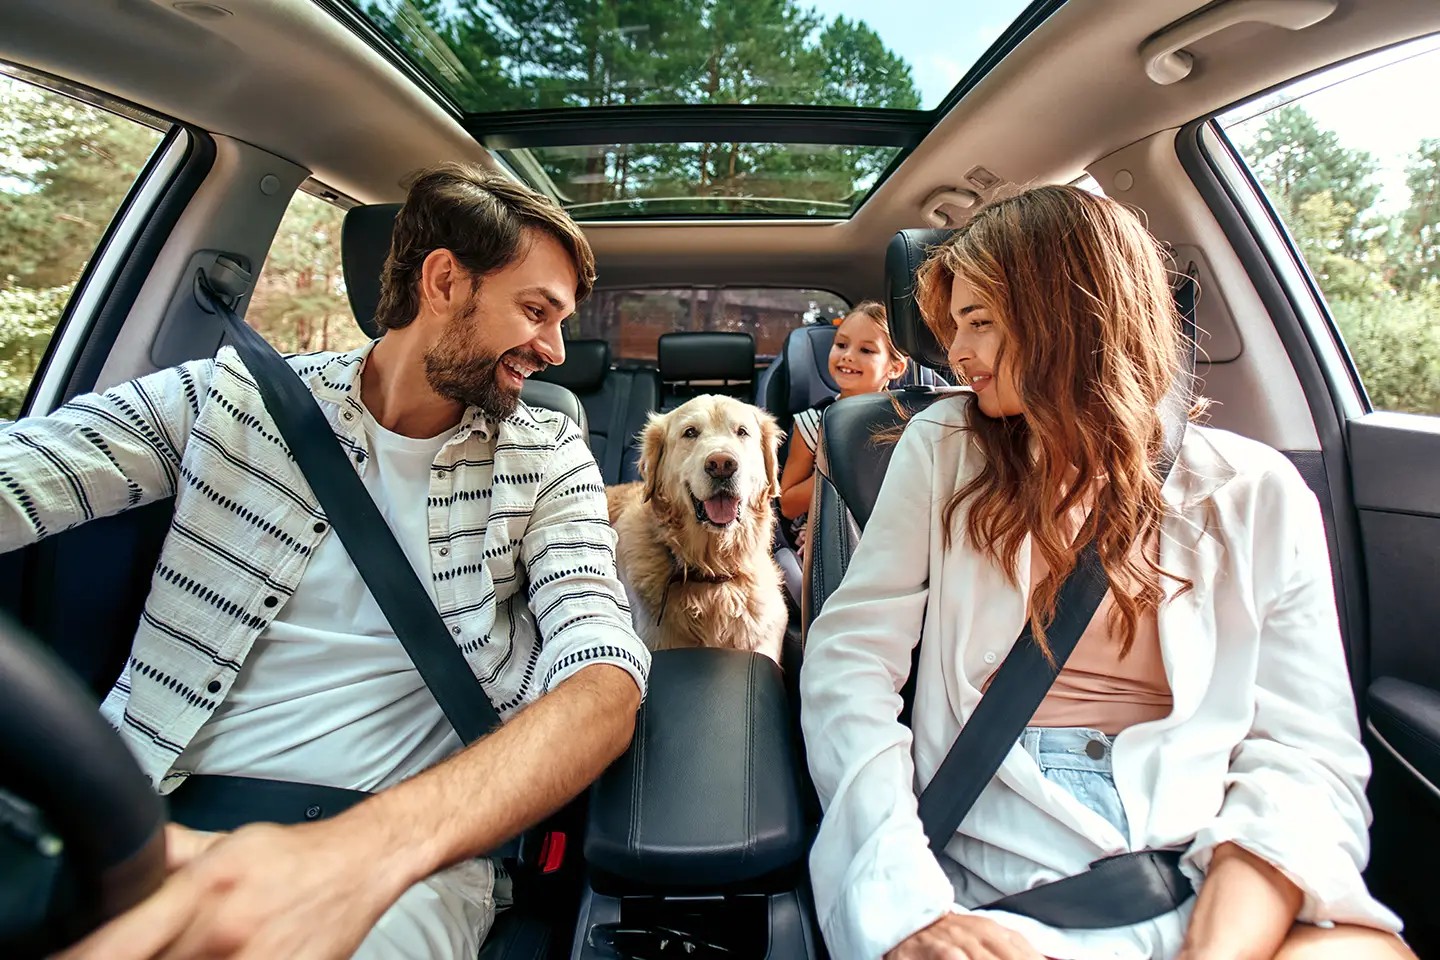 A happy family, mum, dad and daughter in their car with their dog about to go on a journey.